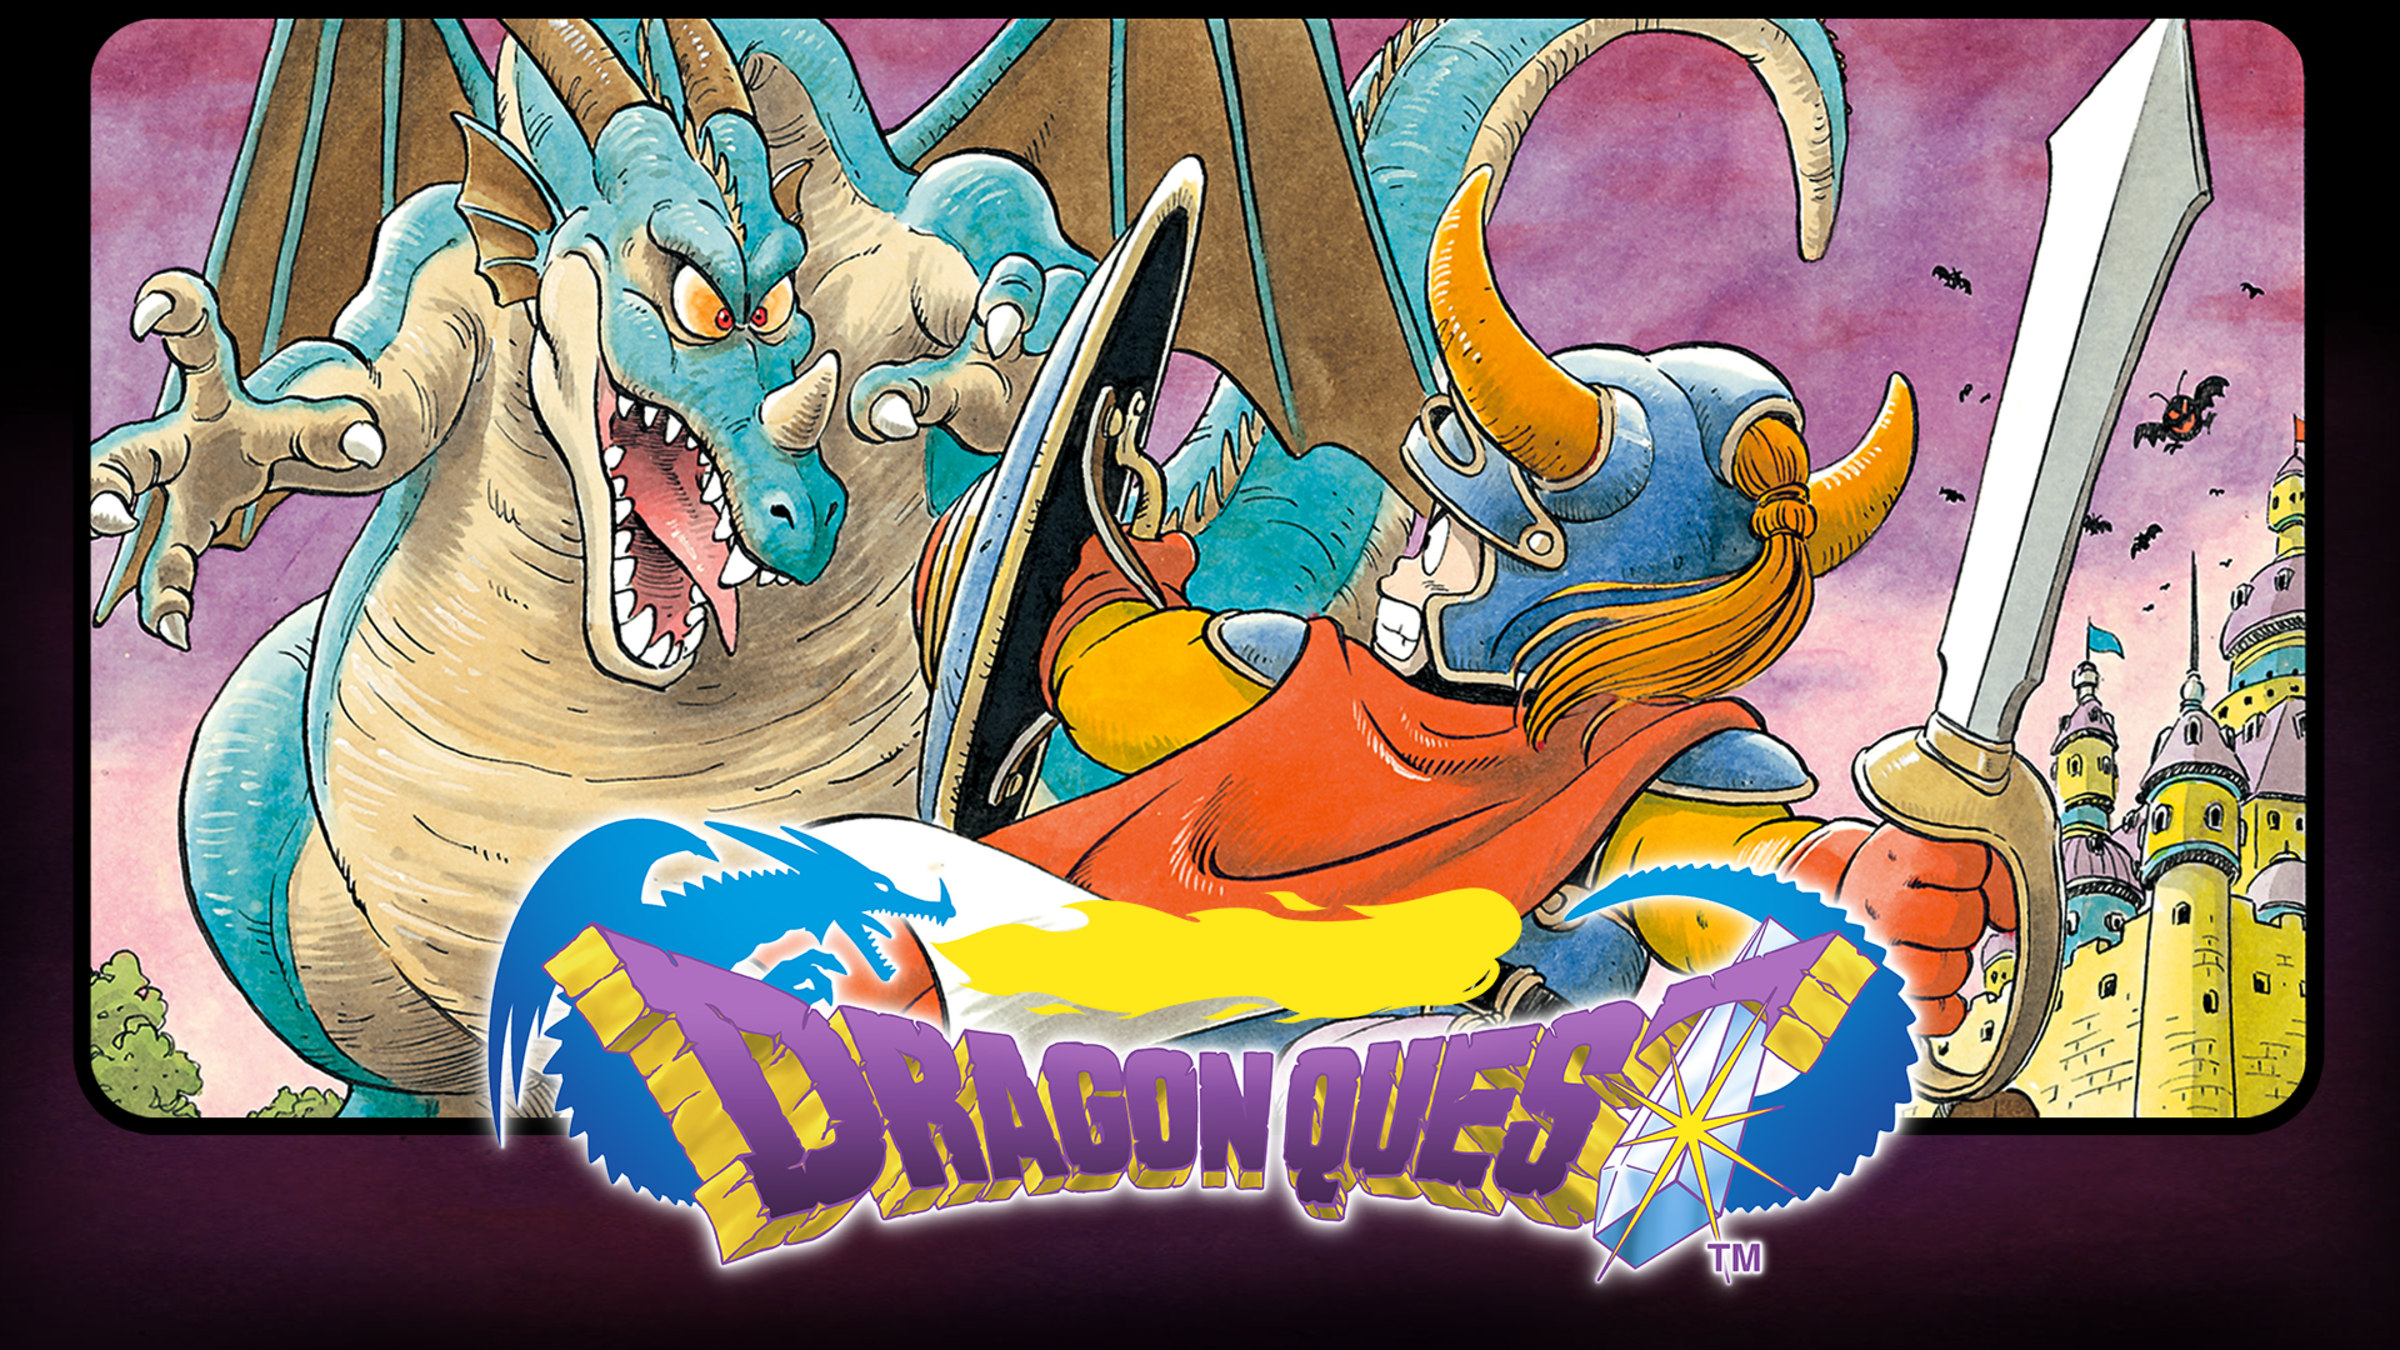 Mose rotation behandle DRAGON QUEST for Nintendo Switch - Nintendo Official Site